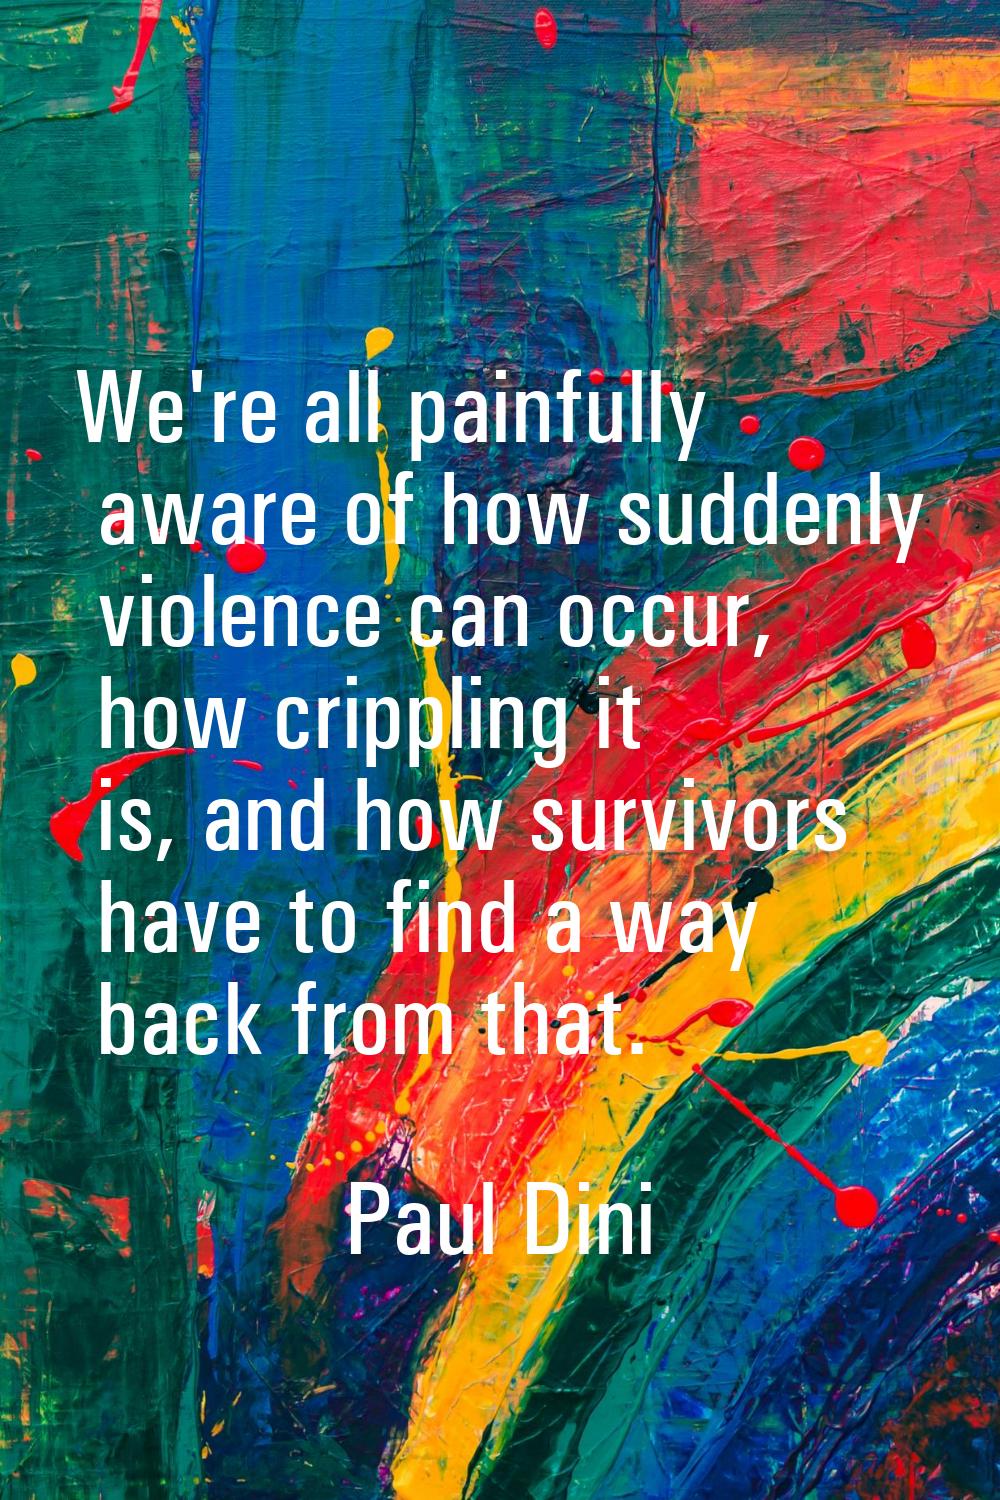 We're all painfully aware of how suddenly violence can occur, how crippling it is, and how survivor